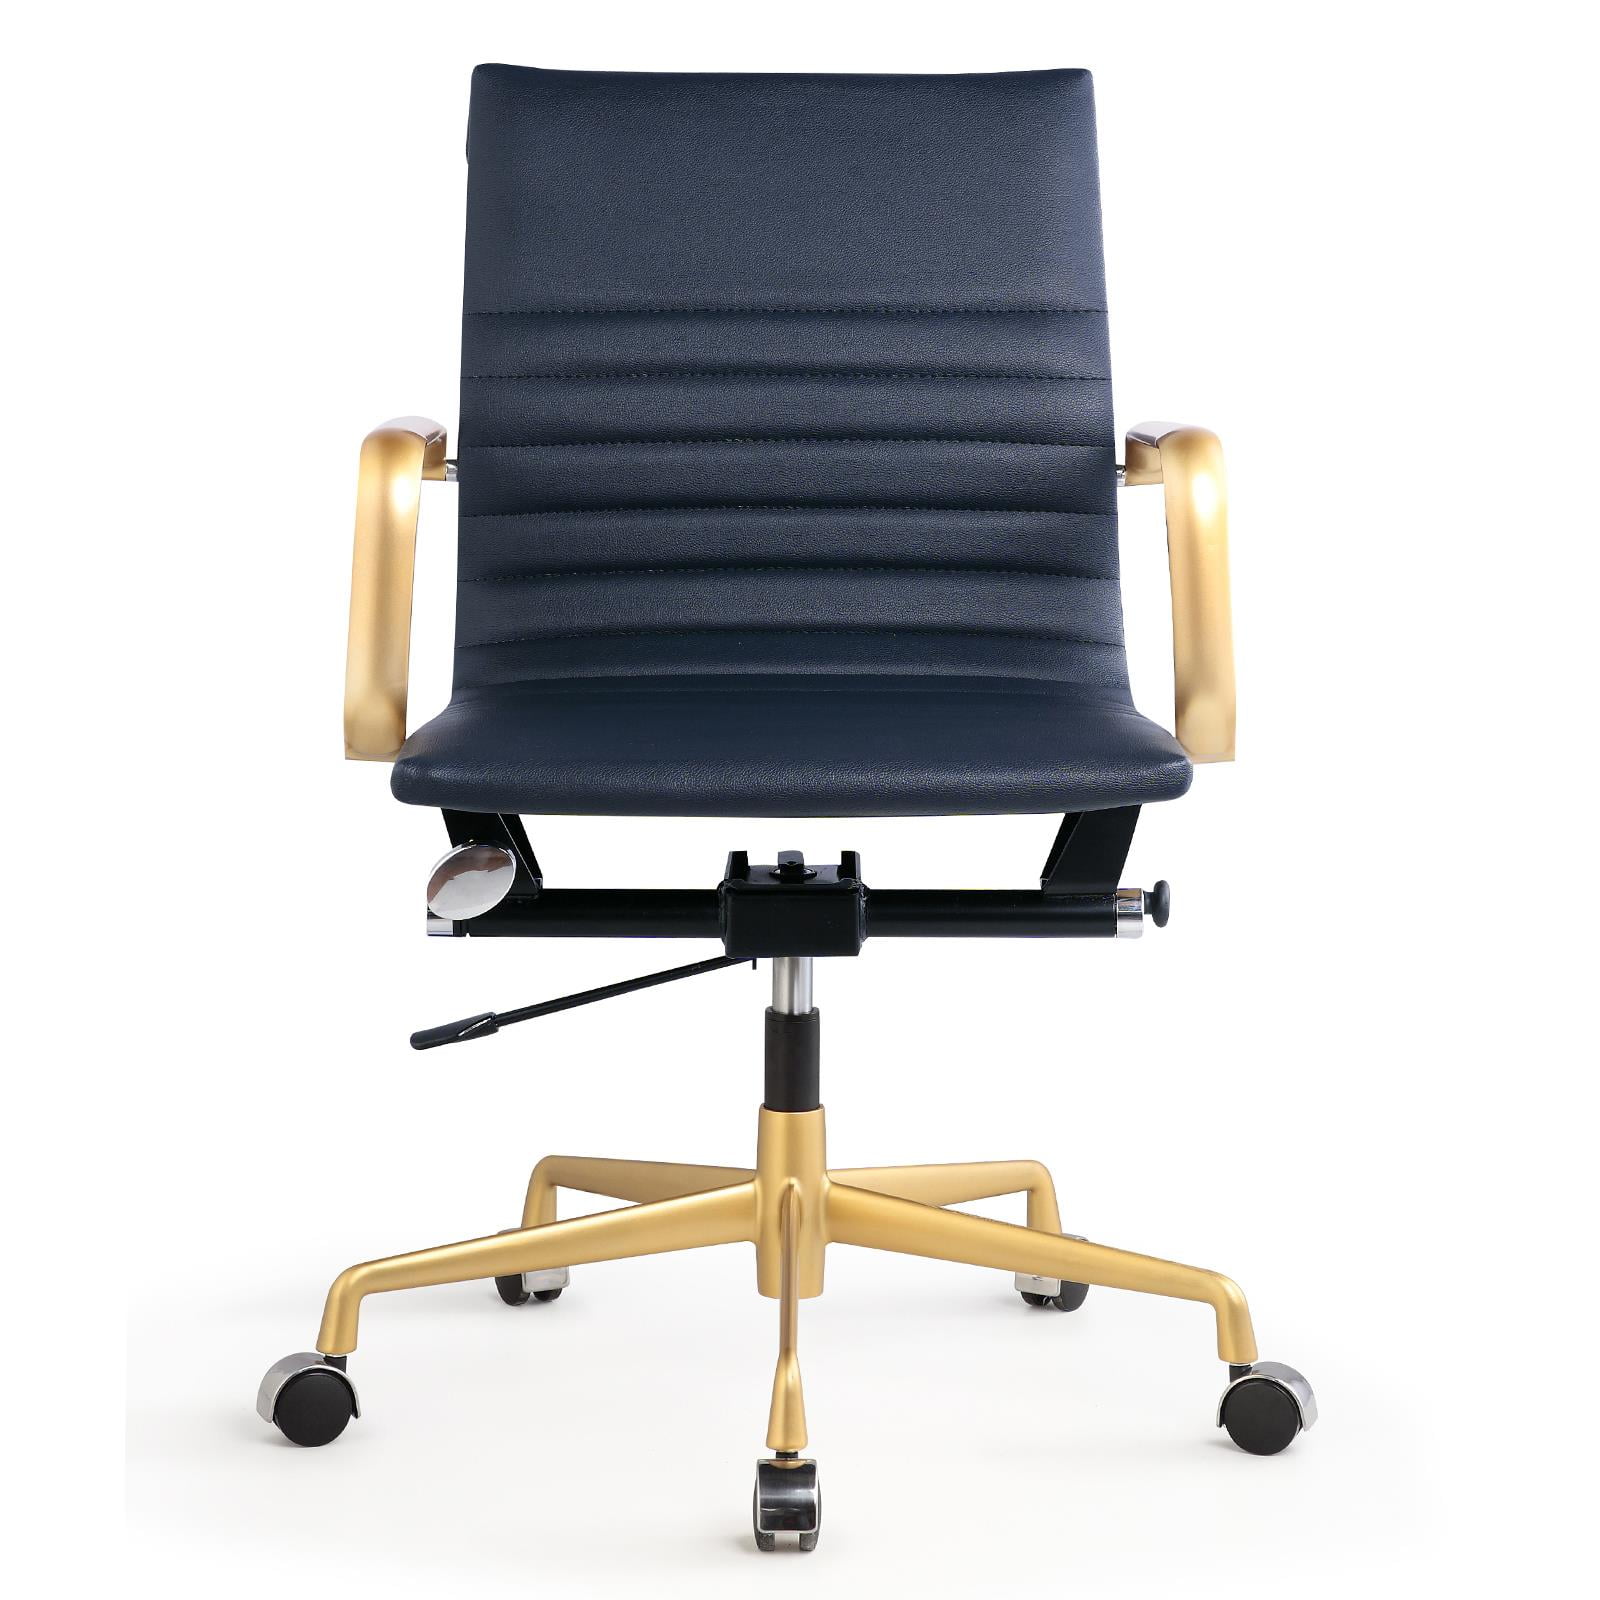 Meelano M348 Office Chair In Gold And, Navy Desk Chair Color